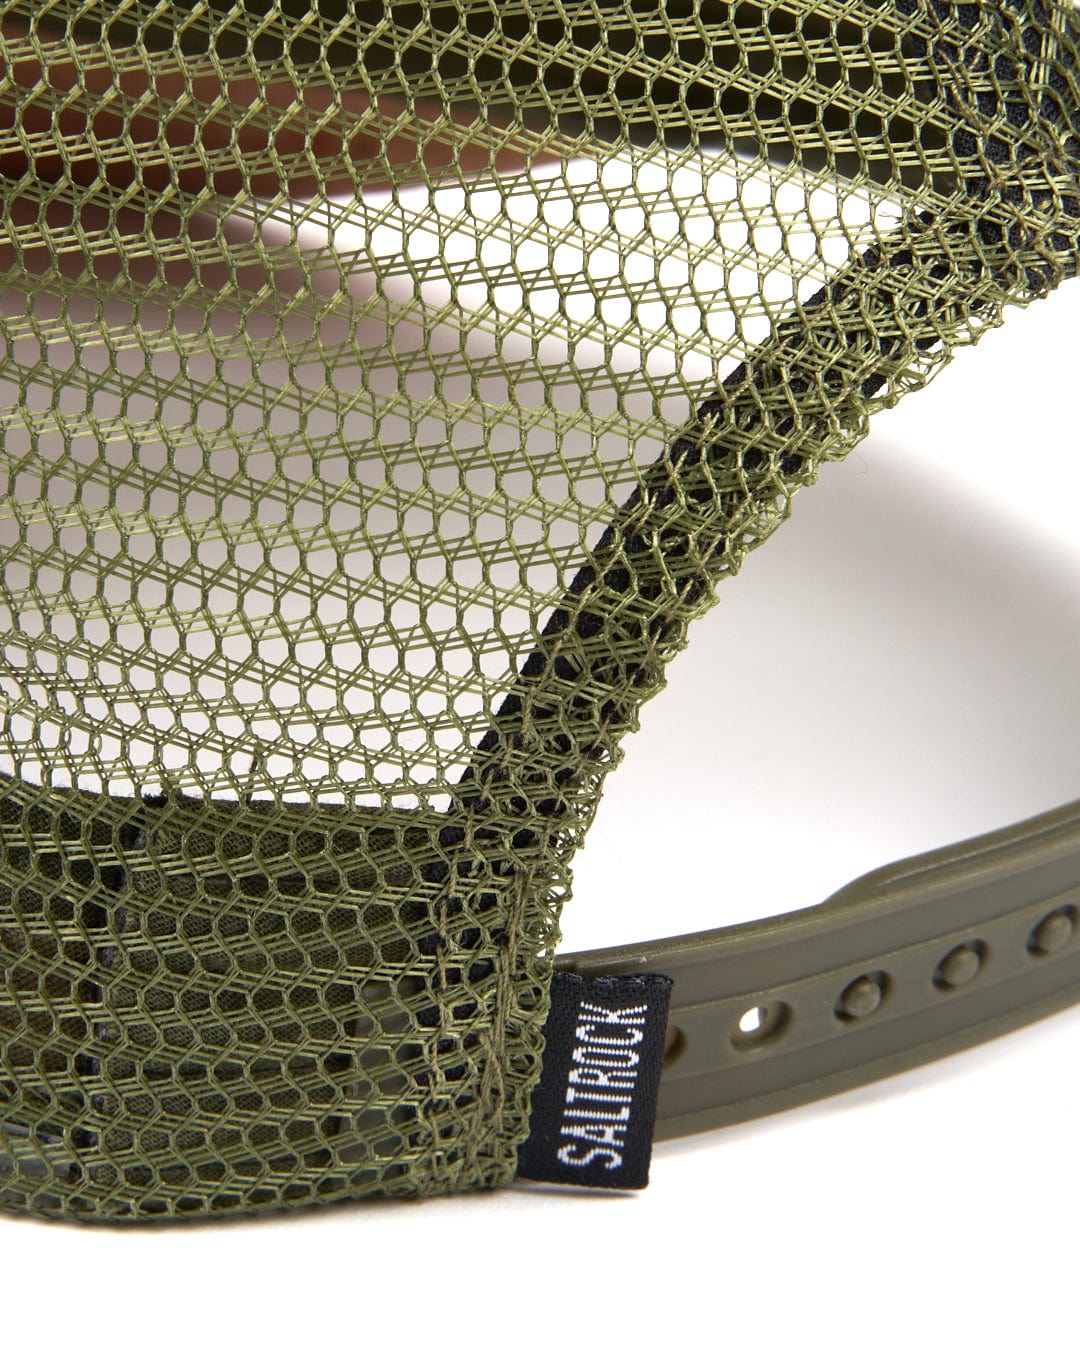 The Lineal embroidered mesh trucker hat in olive green by Saltrock.